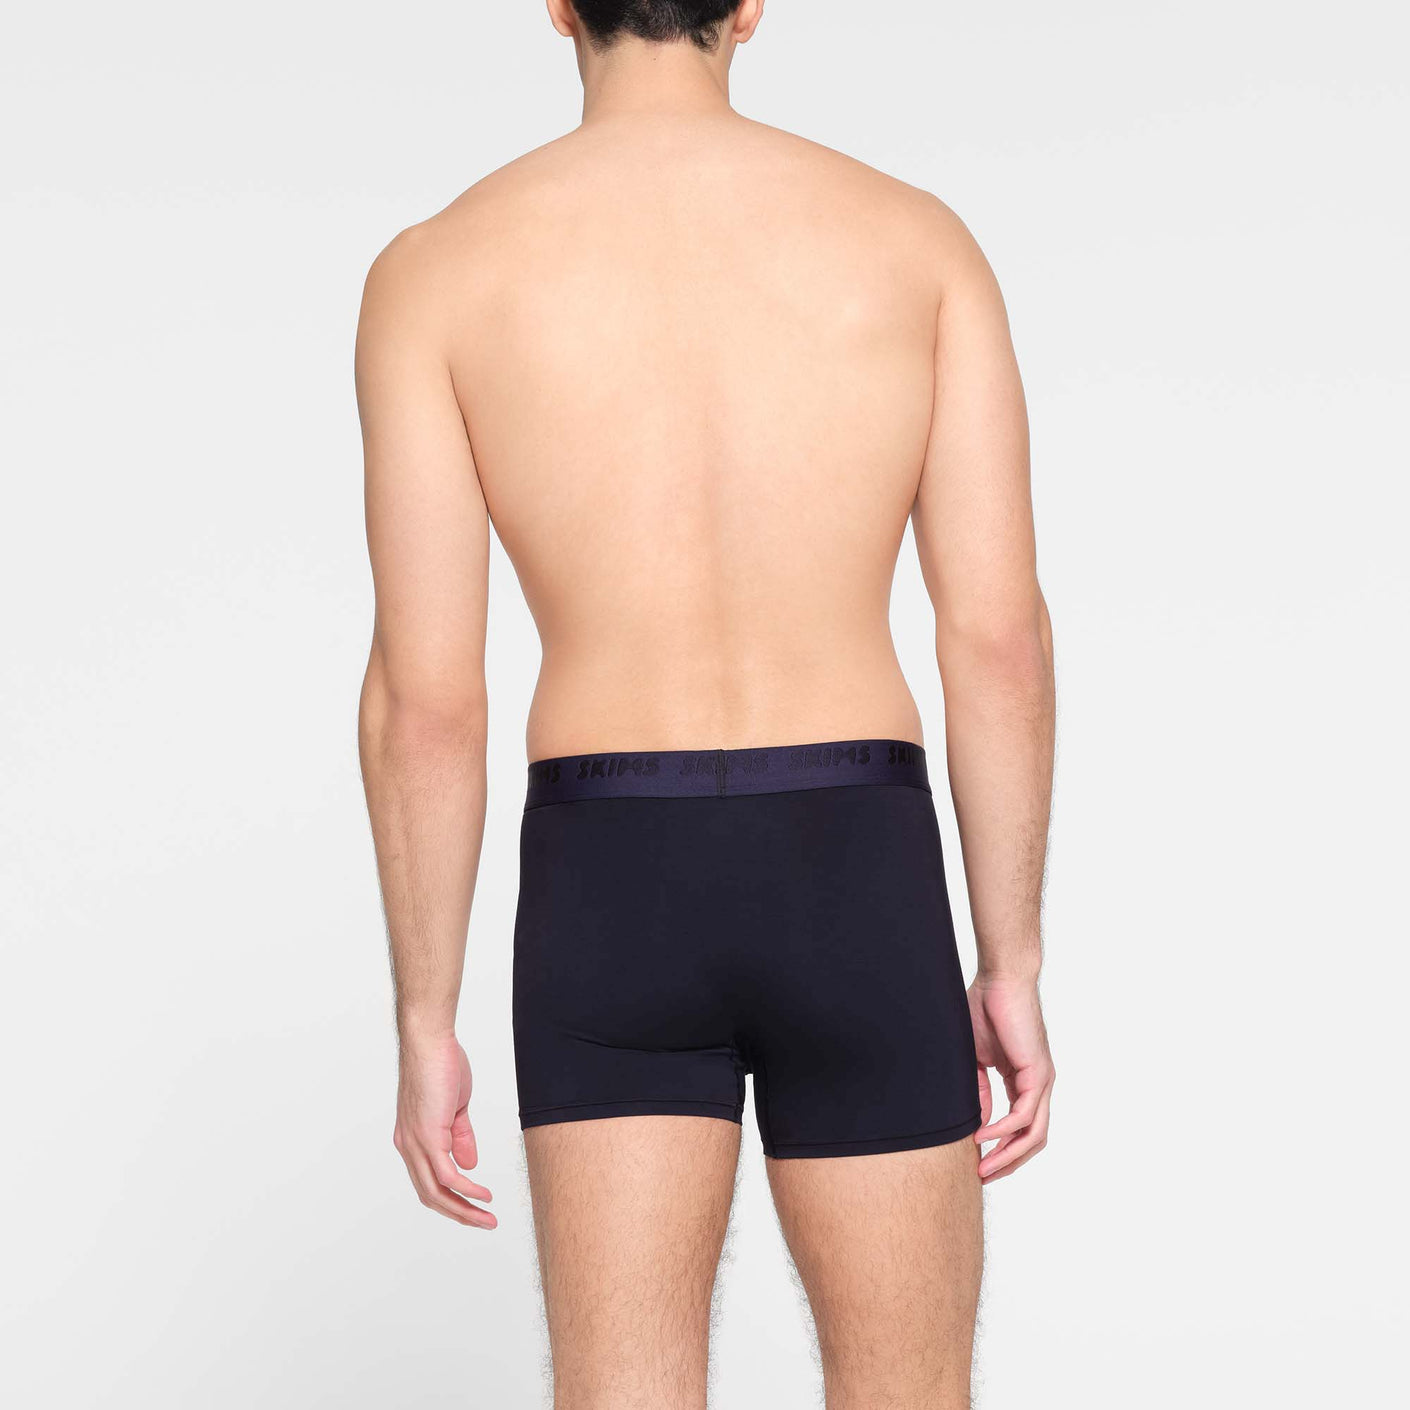 Skims Cotton Mens Brief 3 Pack - Mineral Multi - XS and 2 other